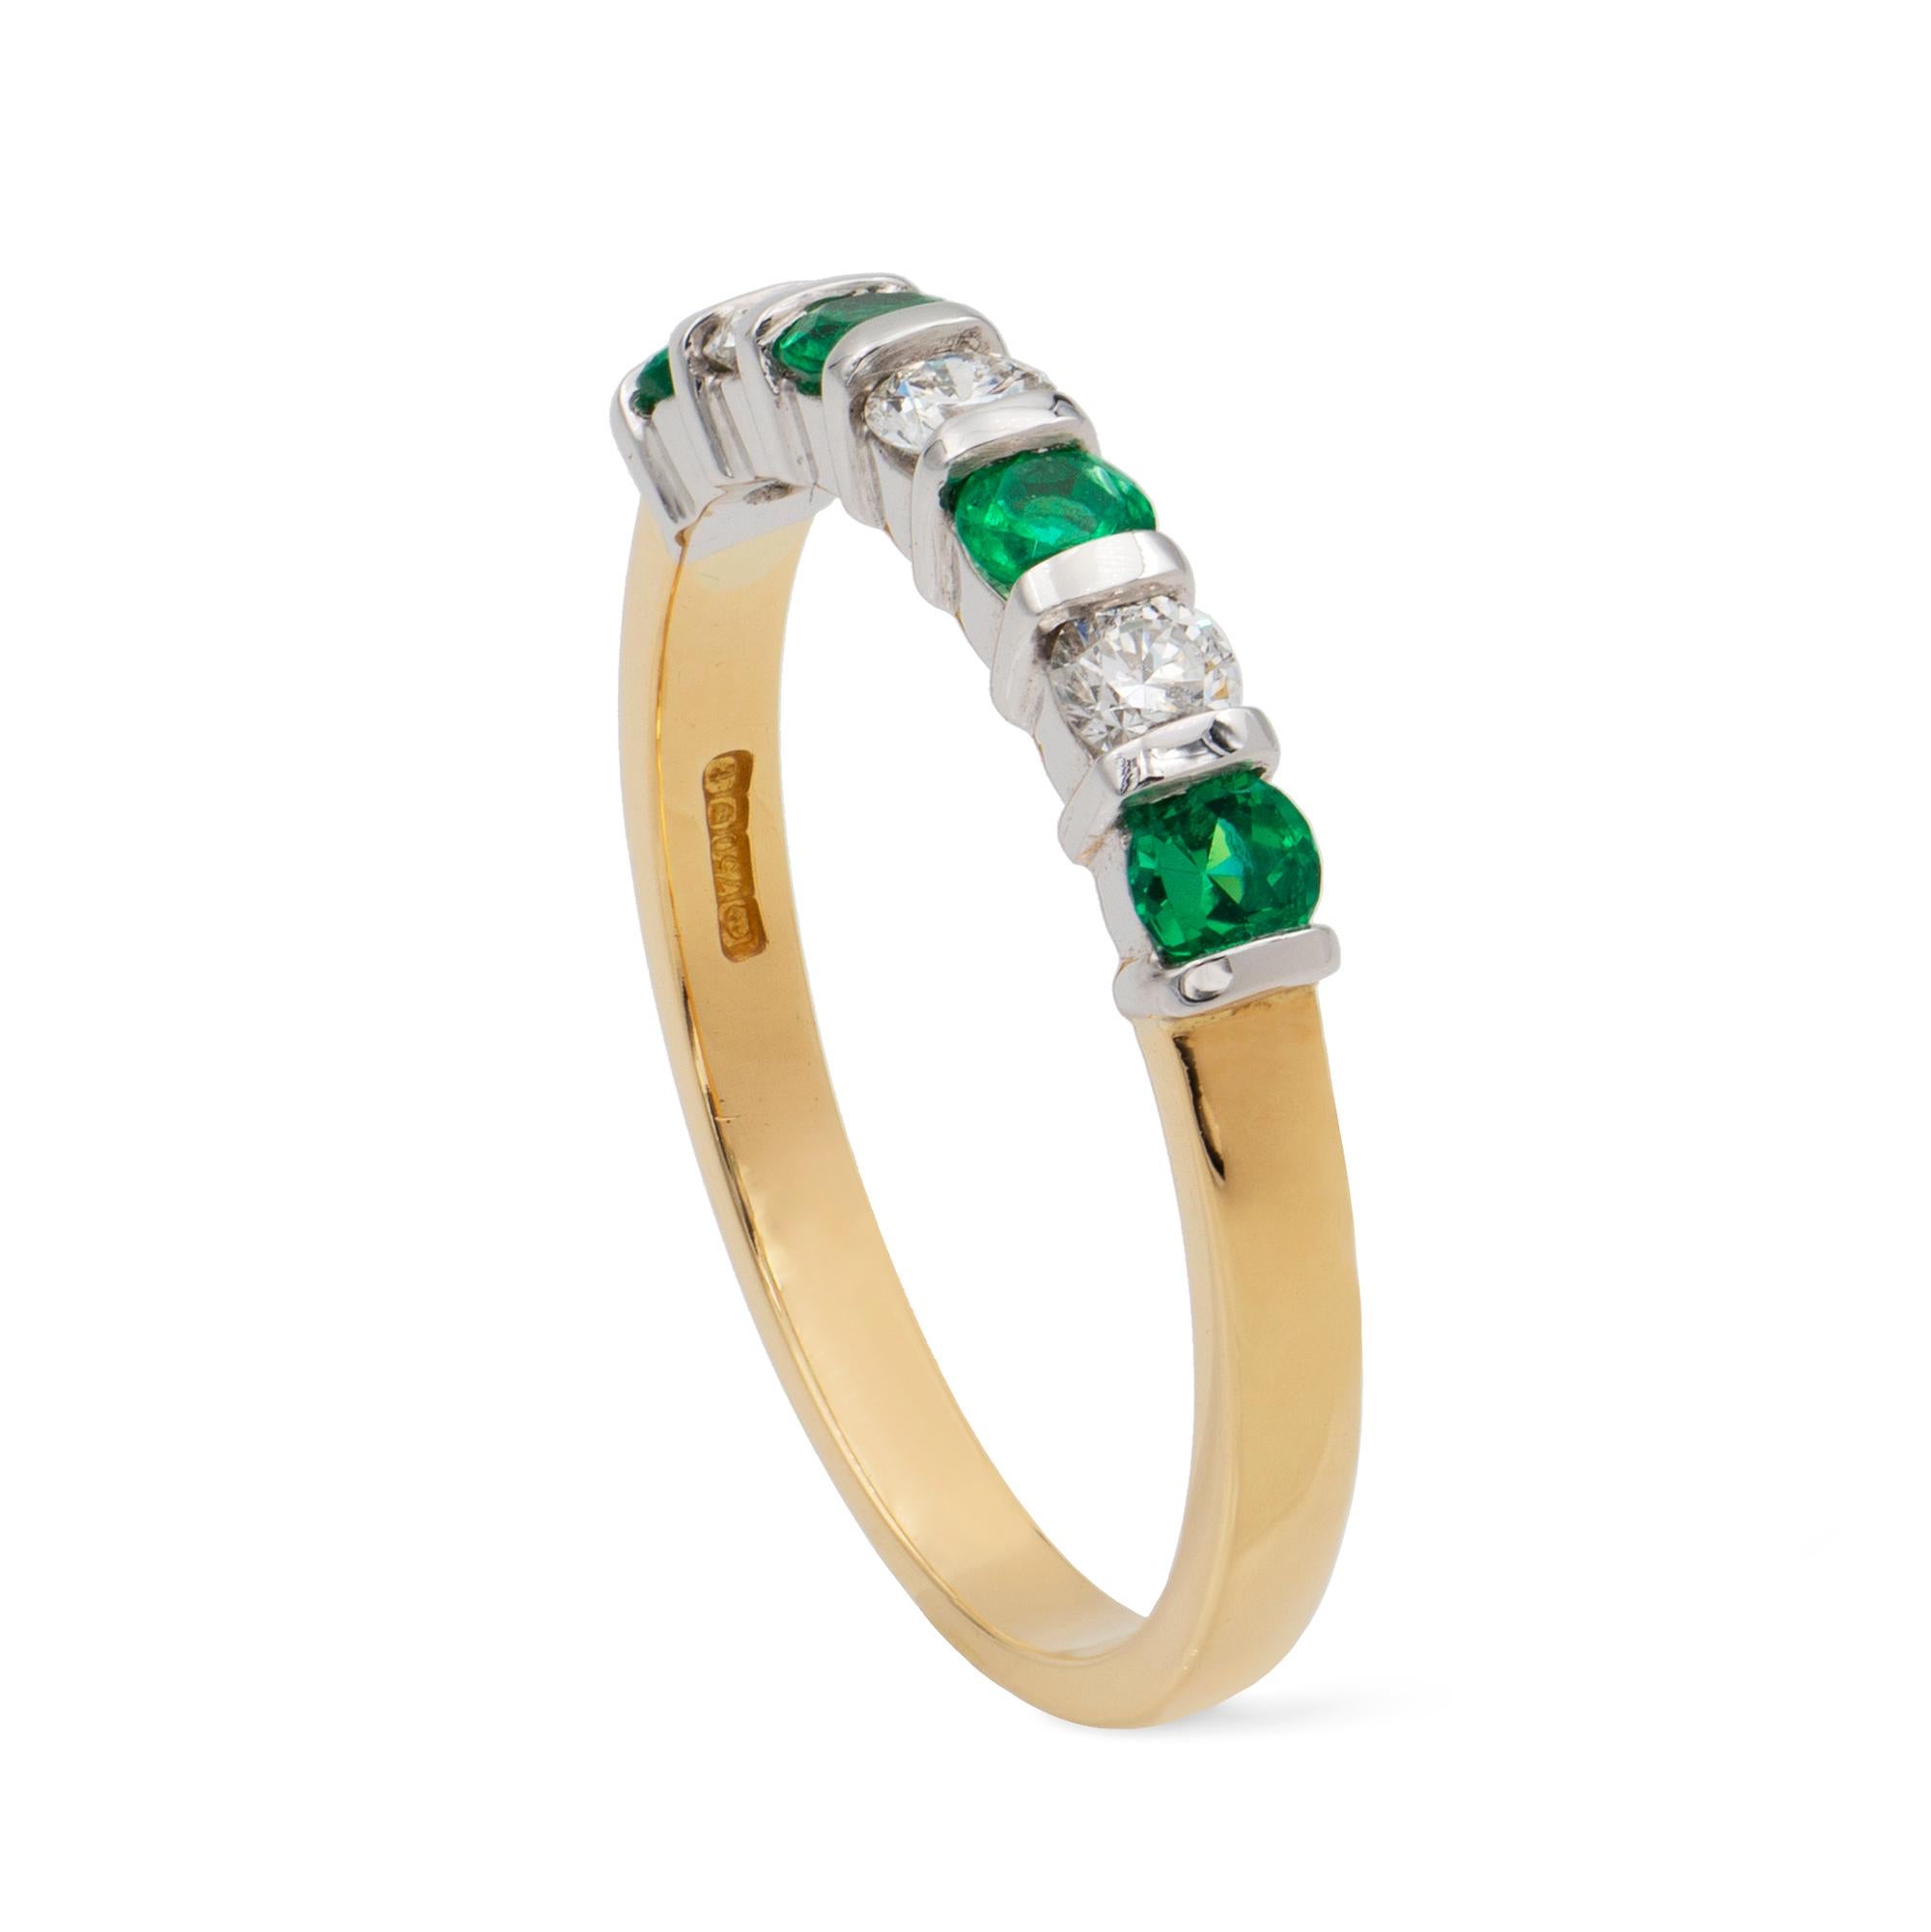 A seven stone diamond and emerald ring, three round brilliant cut diamonds weighing a total of 0.22ct and four round faceted emeralds weighing a total of 0.27ct, in white bar setting, on yellow shank, hallmarked 18 carat gold, London 2018, measuring